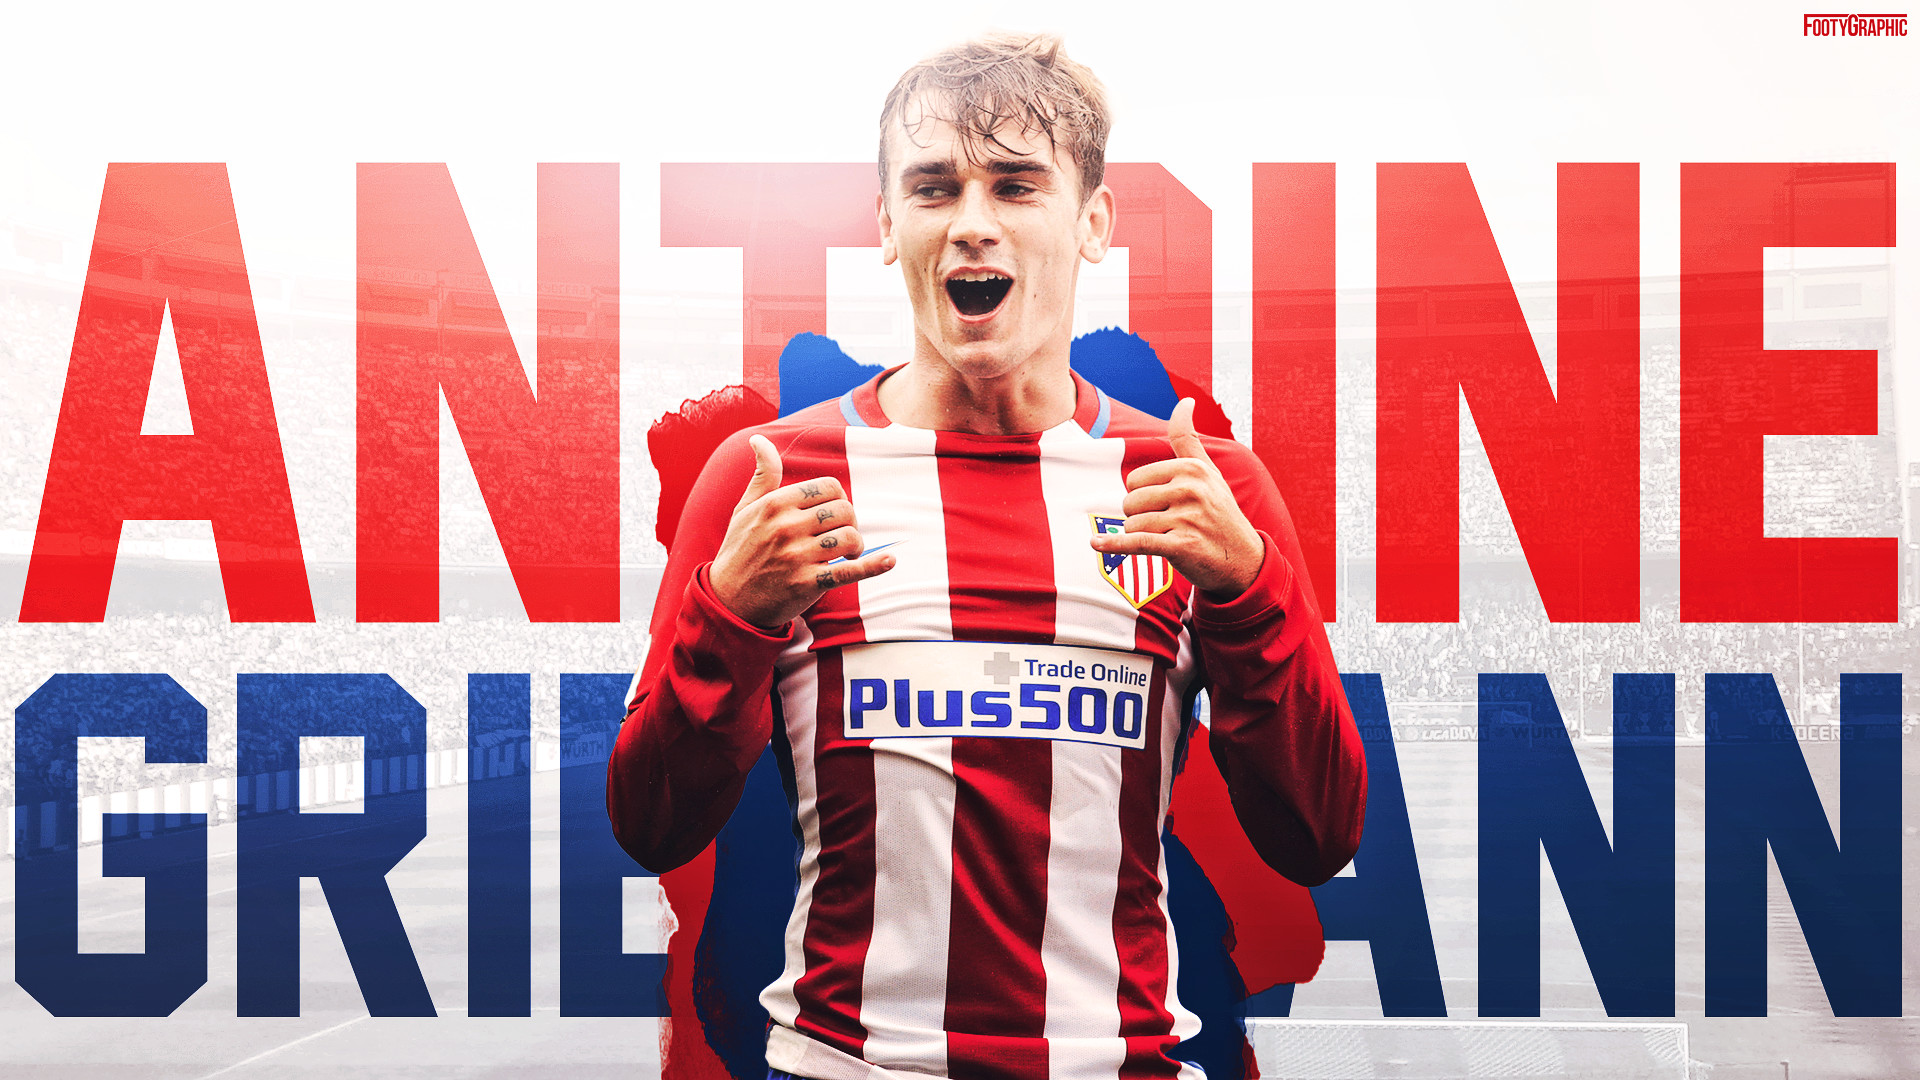 1920x1080 Wallpaper of French Atletico Madrid player player, Antoine Griezmann